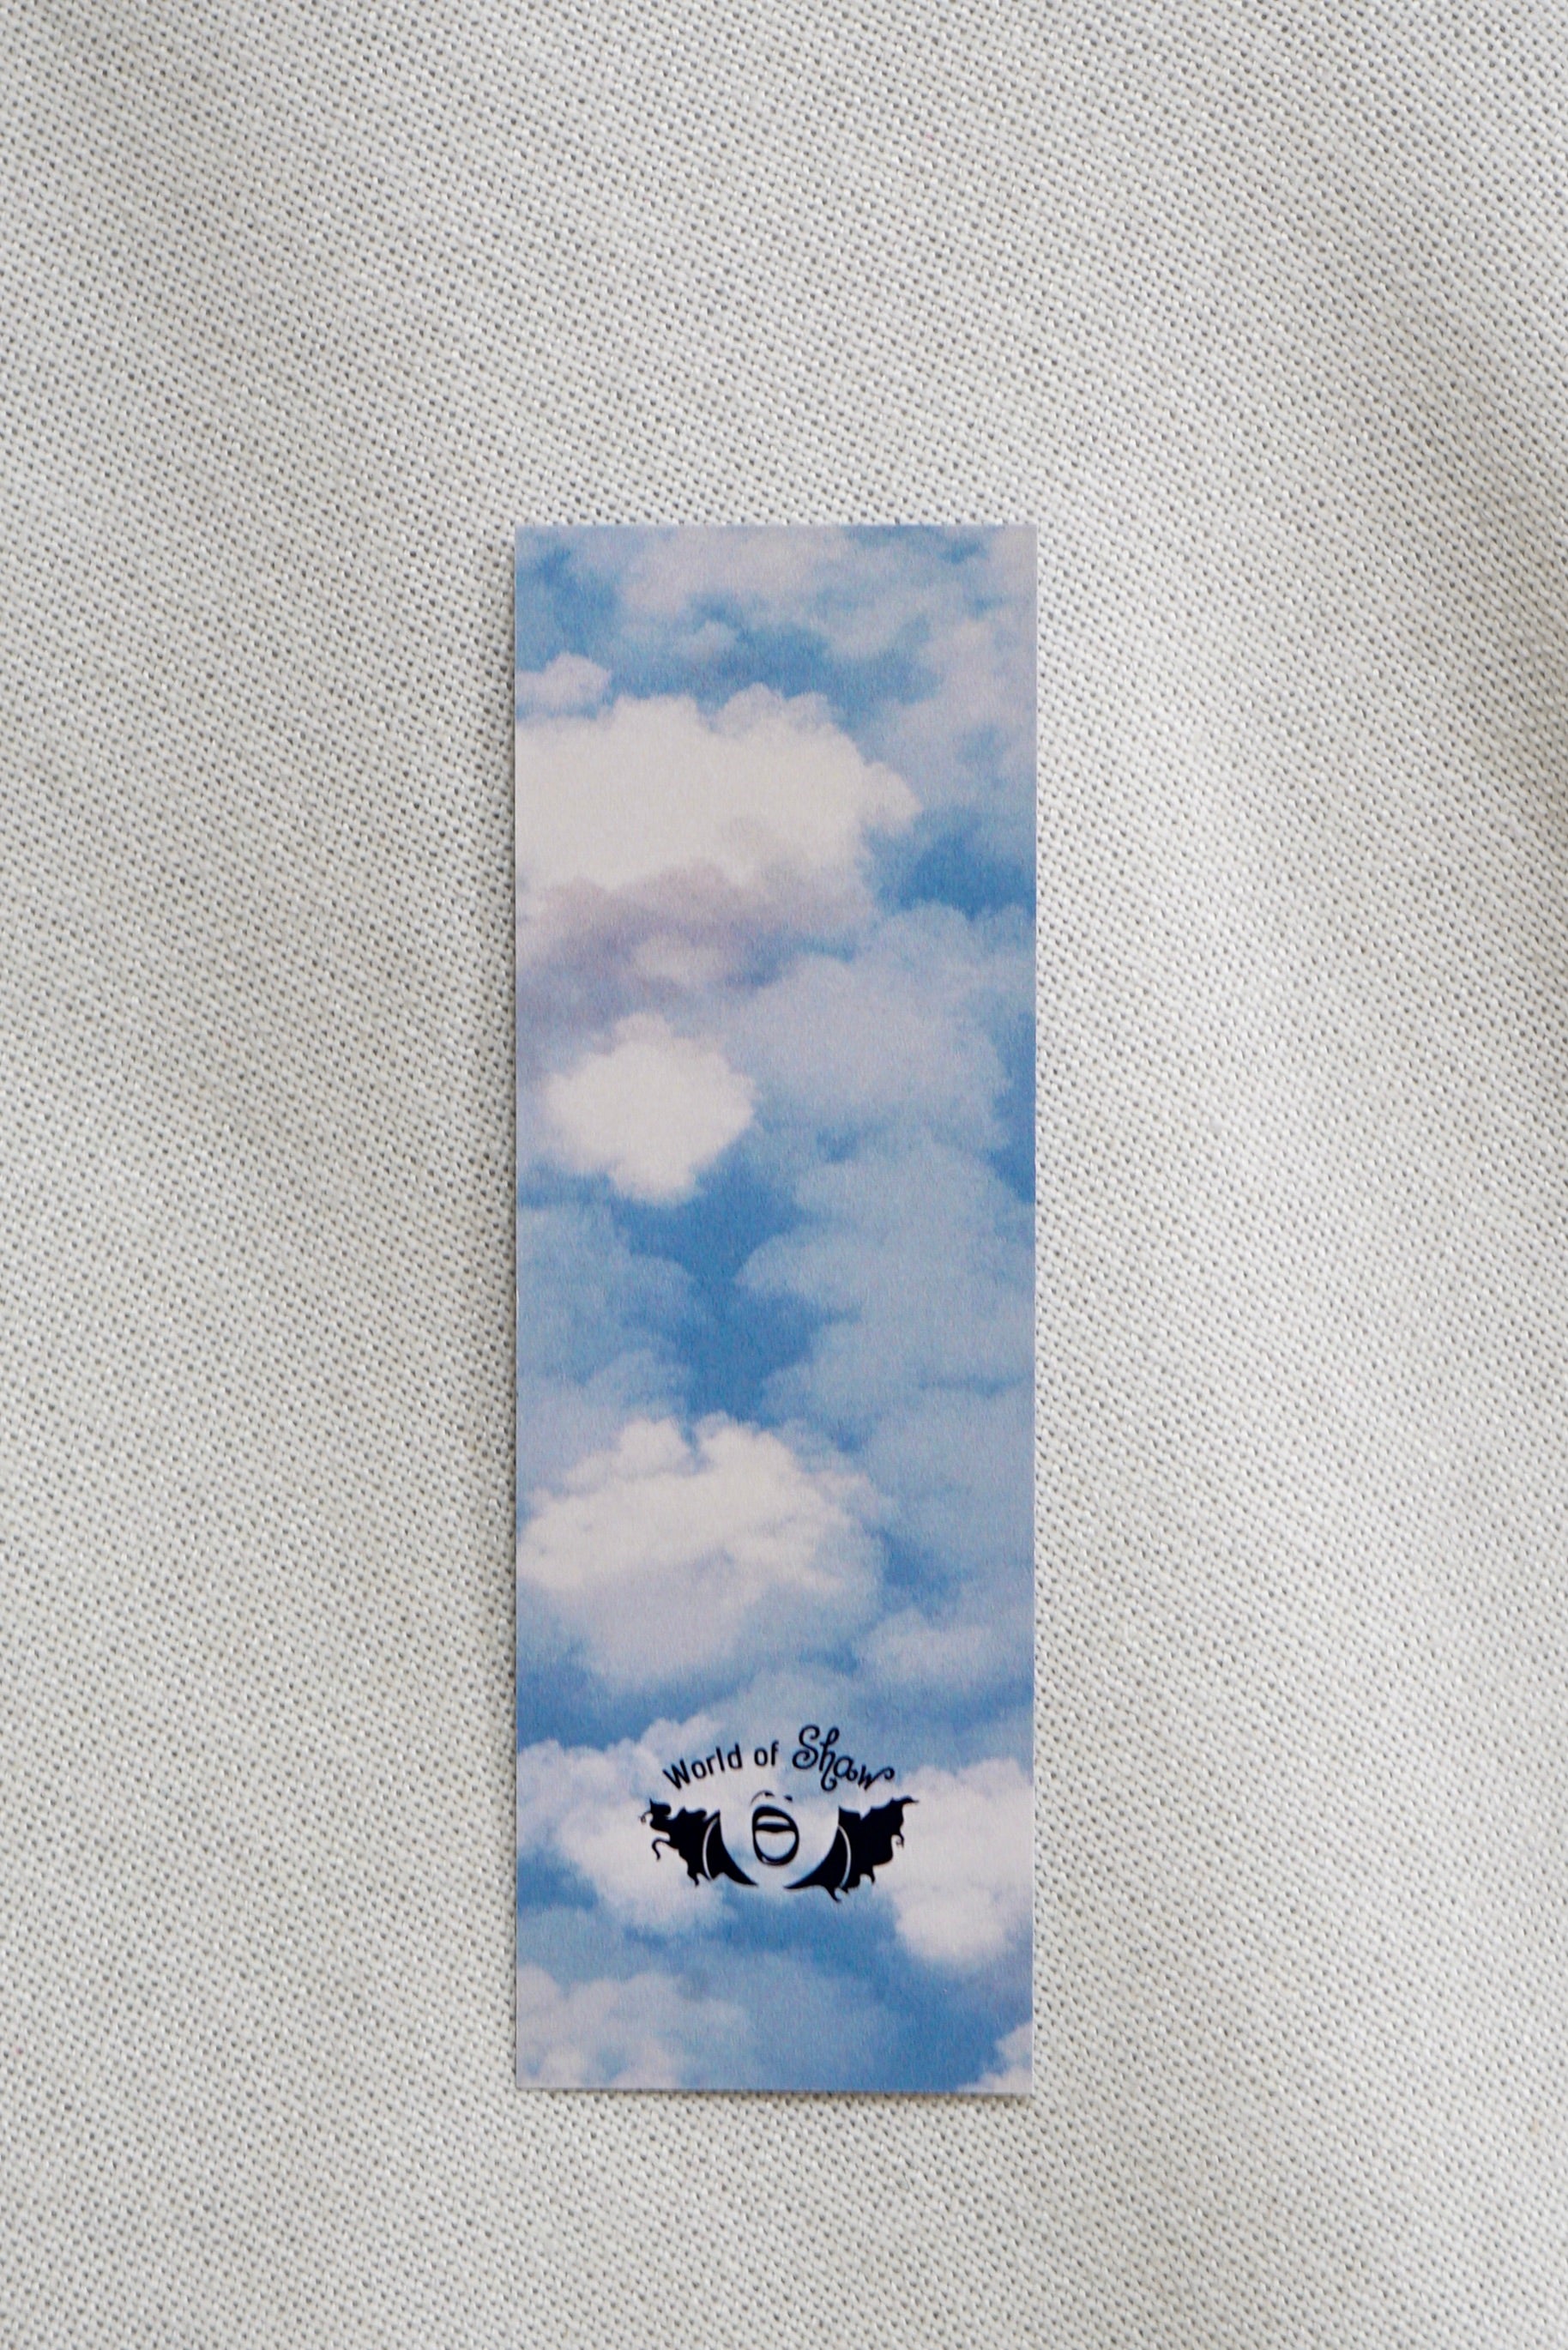 The Sky Isn't The Limit Bookmark